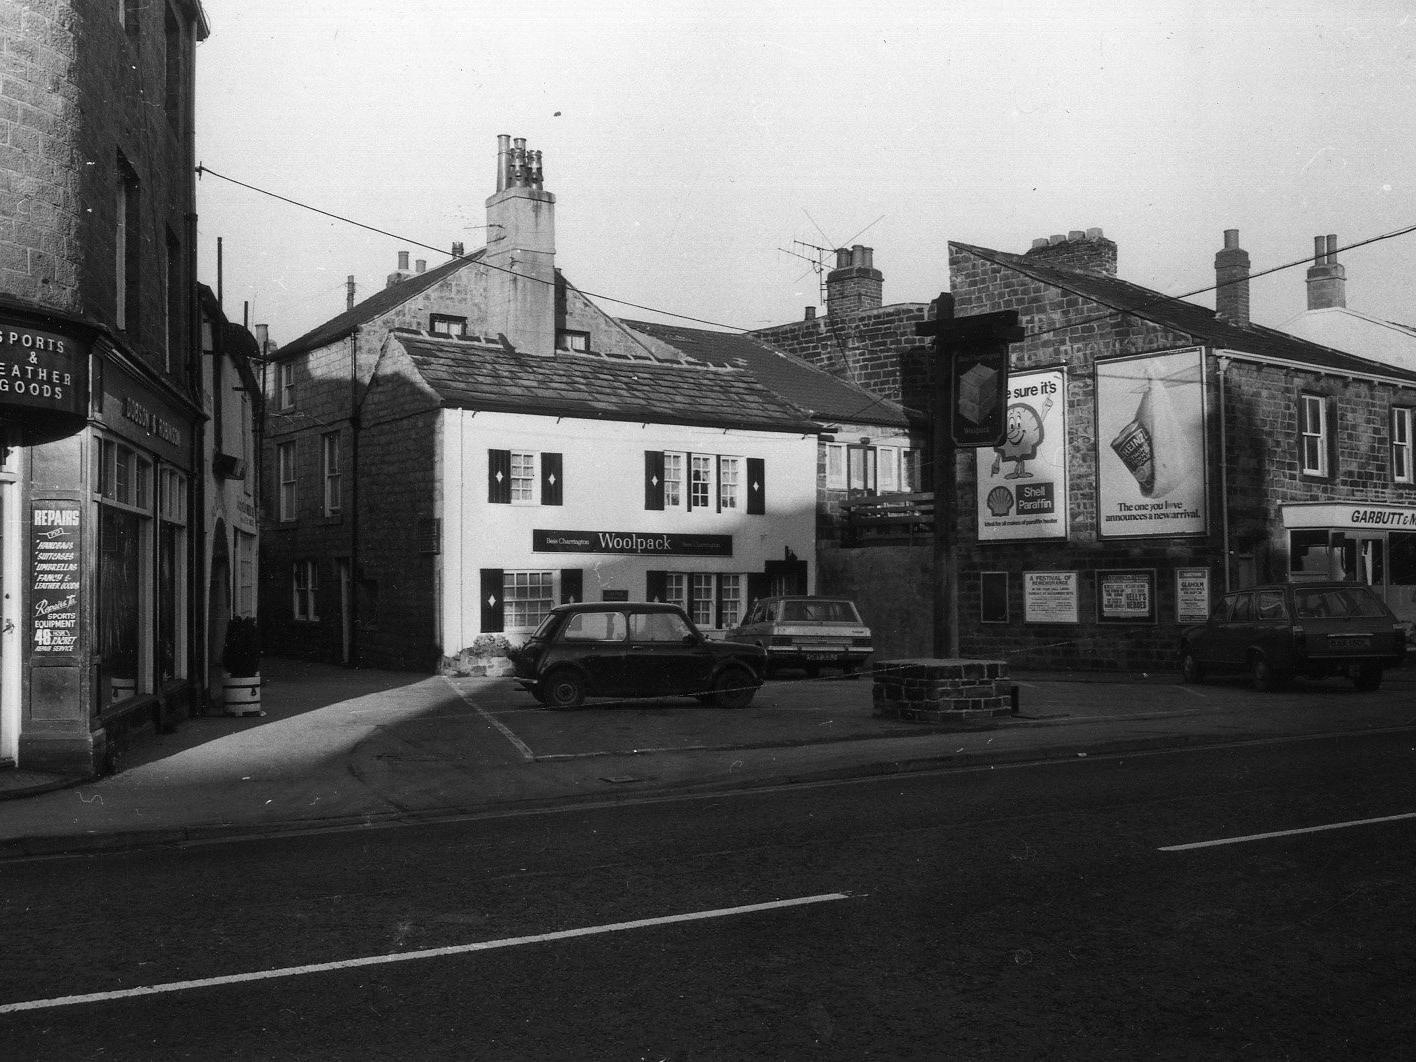 Bondgate with the Woolpack public house in the centre. Also visible are Dobson & Robinson, sports and leather goods on the left and Garbutt & Mawson Ltd., ironmongers, followed by the Bowling Green pub on the right.